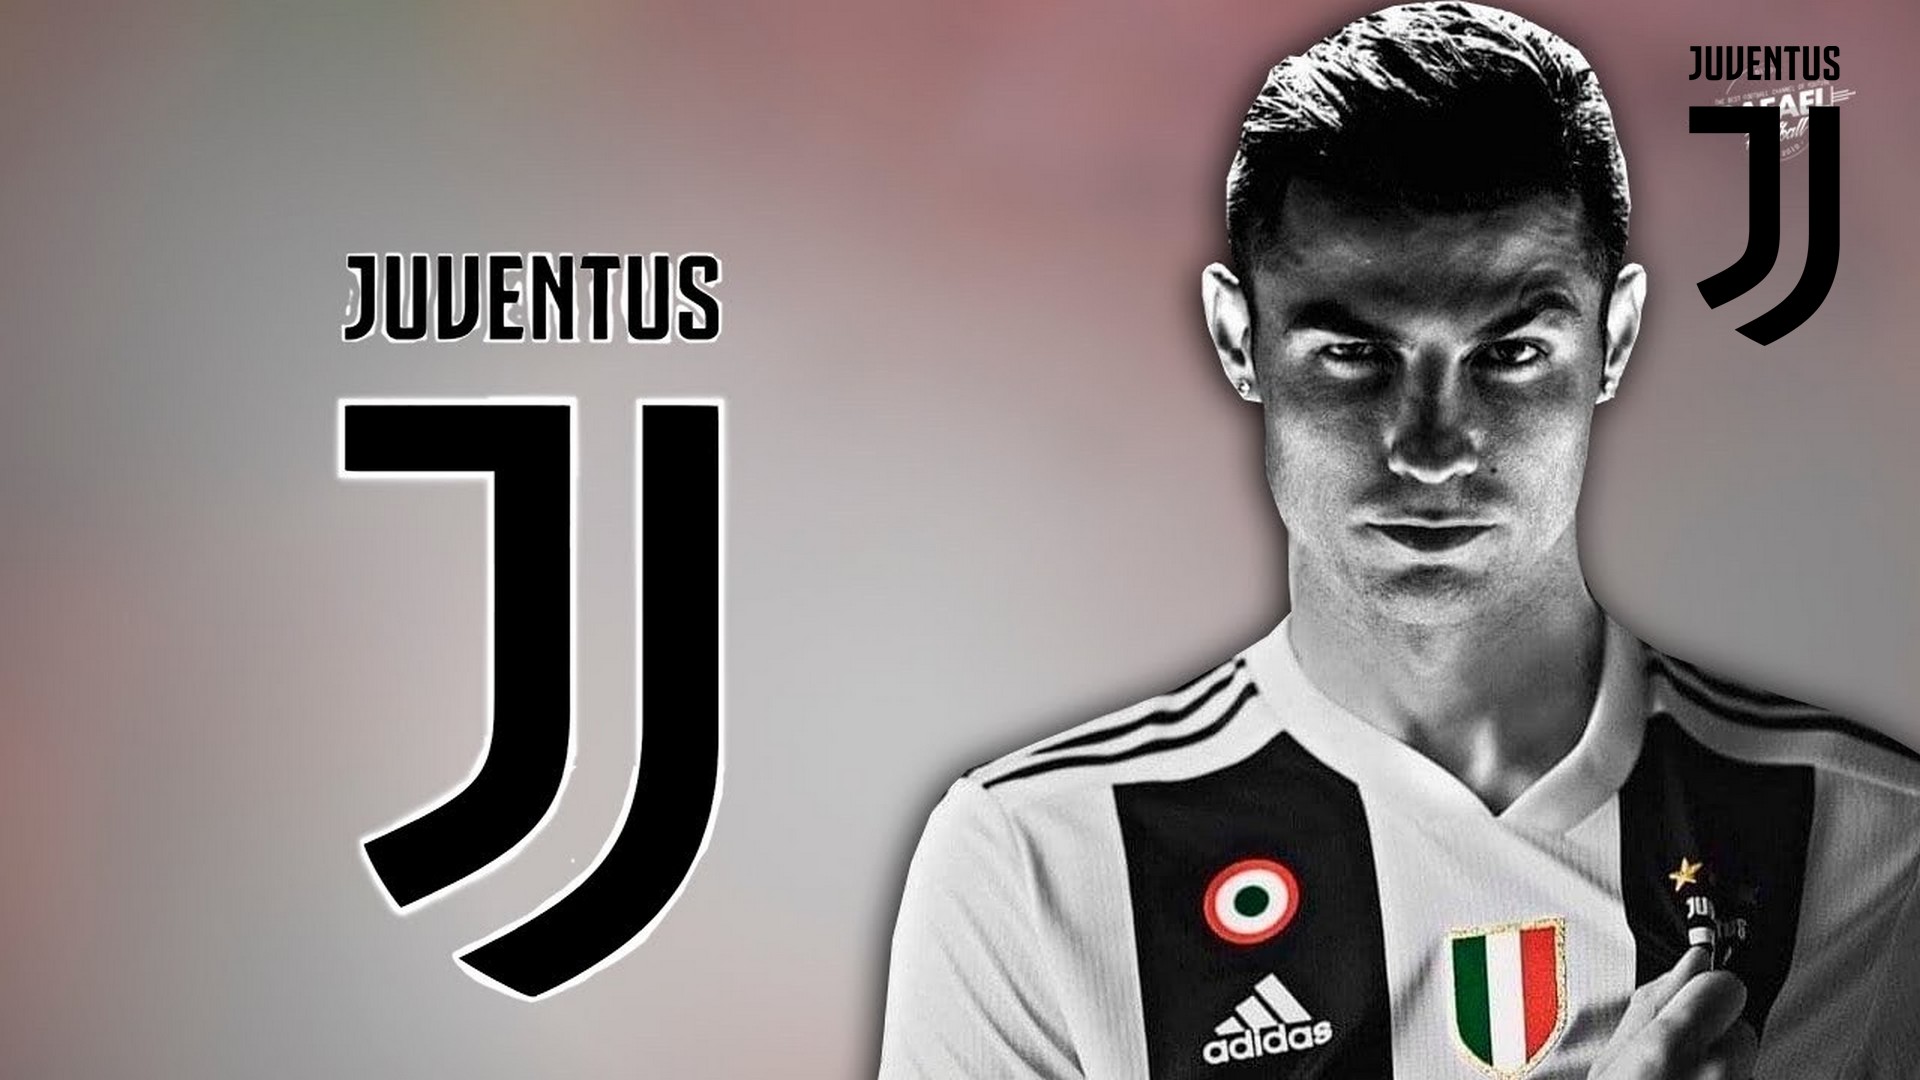 CR7 Juventus Wallpaper With Resolution 1920X1080 pixel. You can make this wallpaper for your Mac or Windows Desktop Background, iPhone, Android or Tablet and another Smartphone device for free